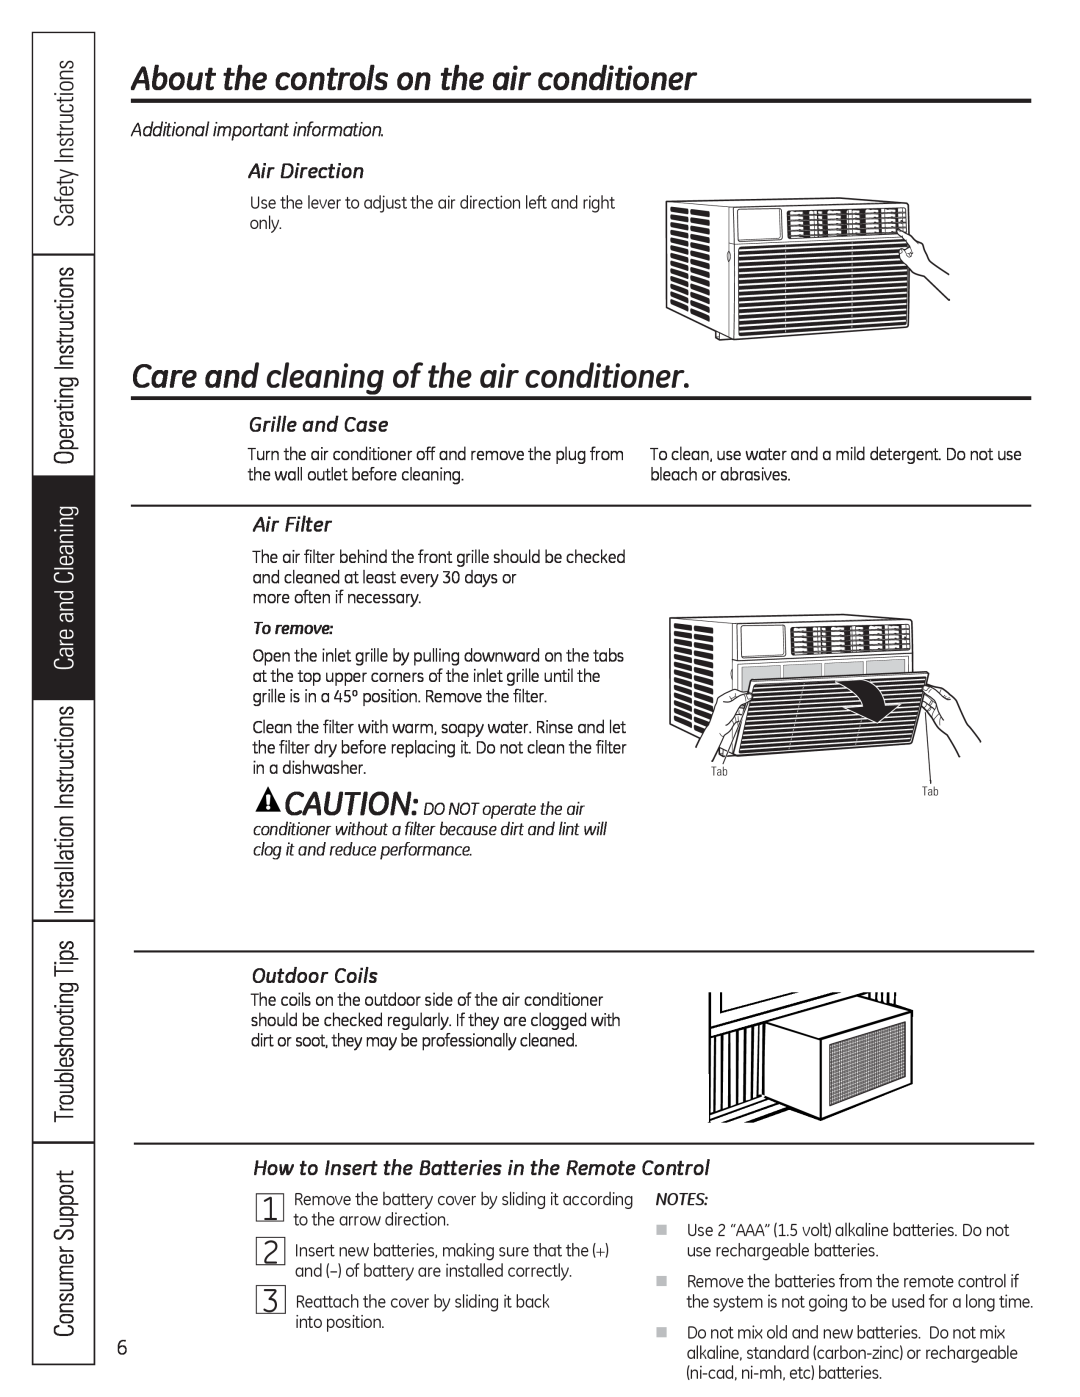 GE AED10* Care and cleaning of the air conditioner, About the controls on the air conditioner, Air Direction, Air Filter 